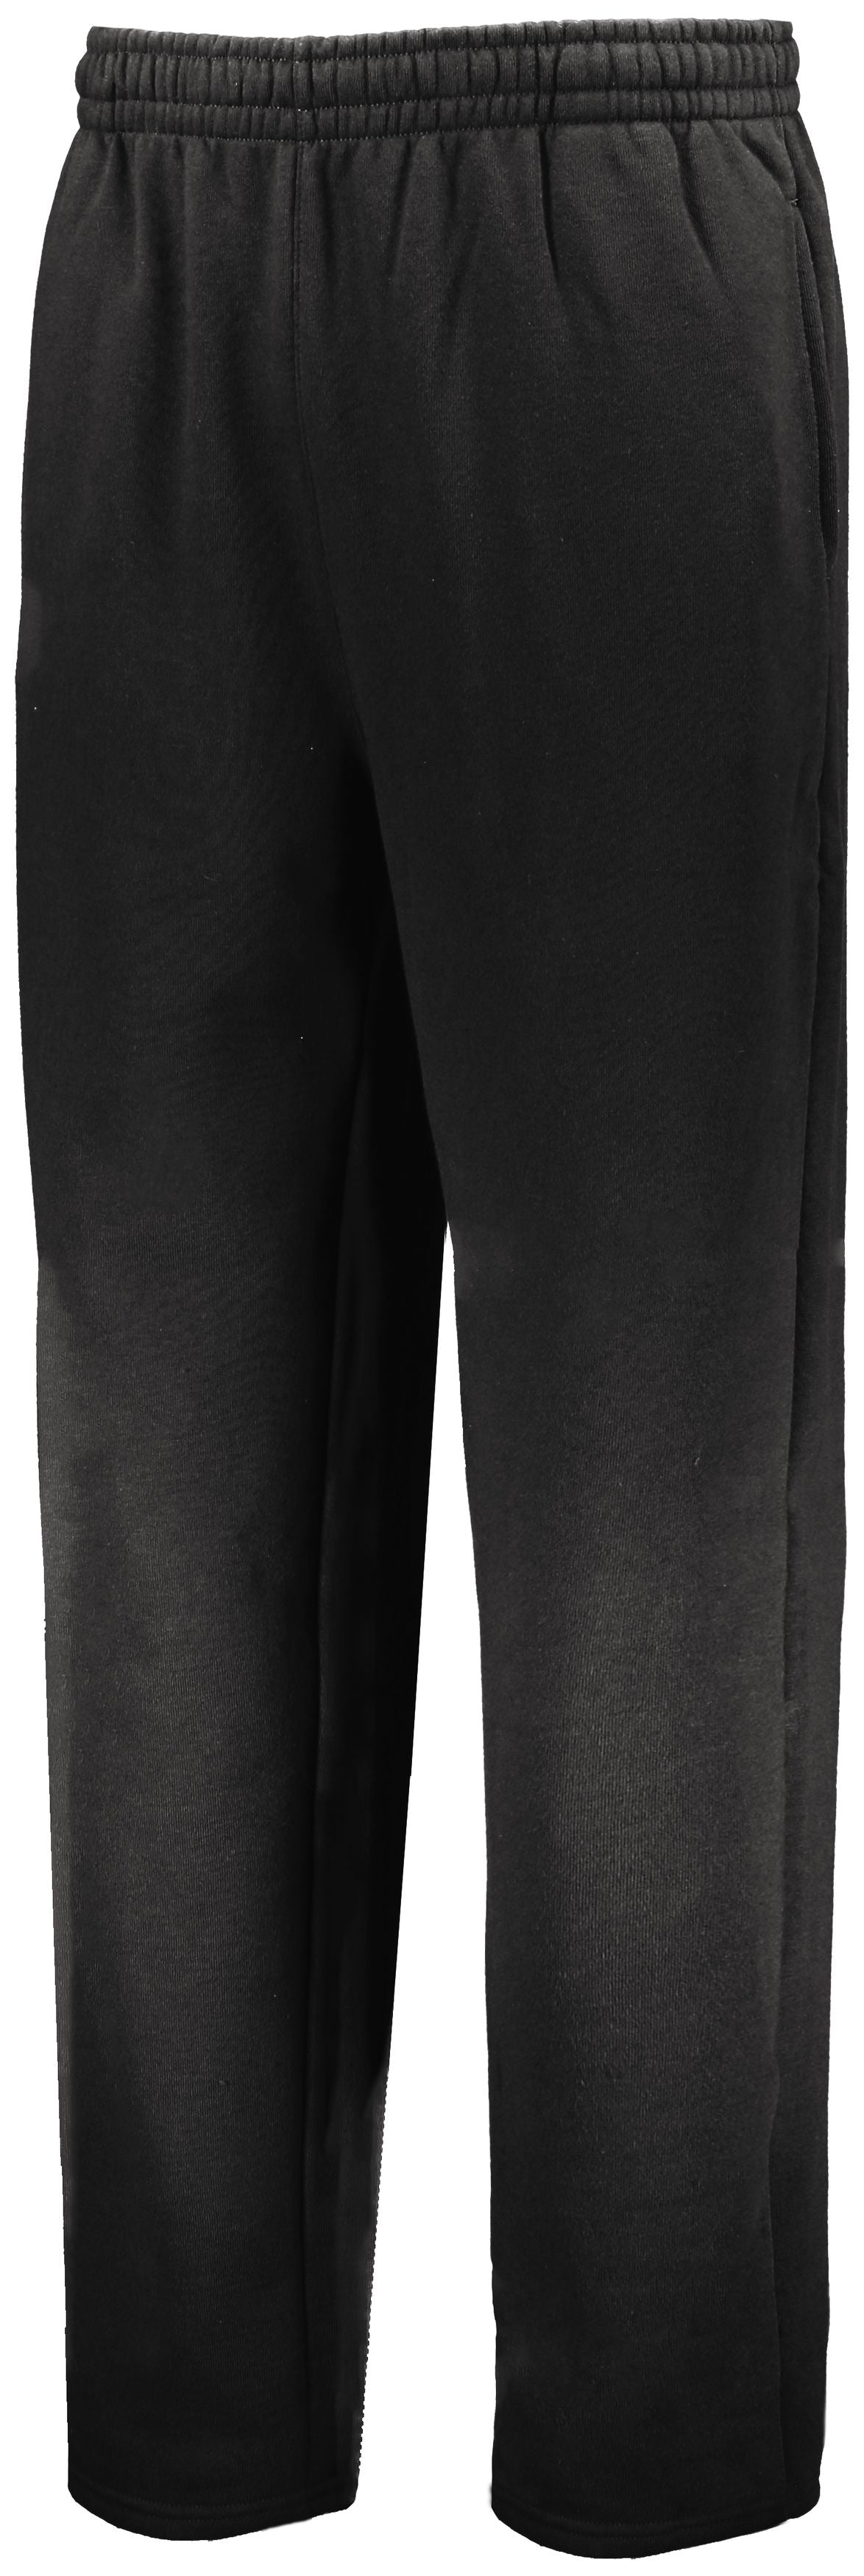 Russell Athletic 80/20 Open Bottom Sweatpant in Black  -Part of the Adult, Adult-Pants, Pants, Russell-Athletic-Products product lines at KanaleyCreations.com